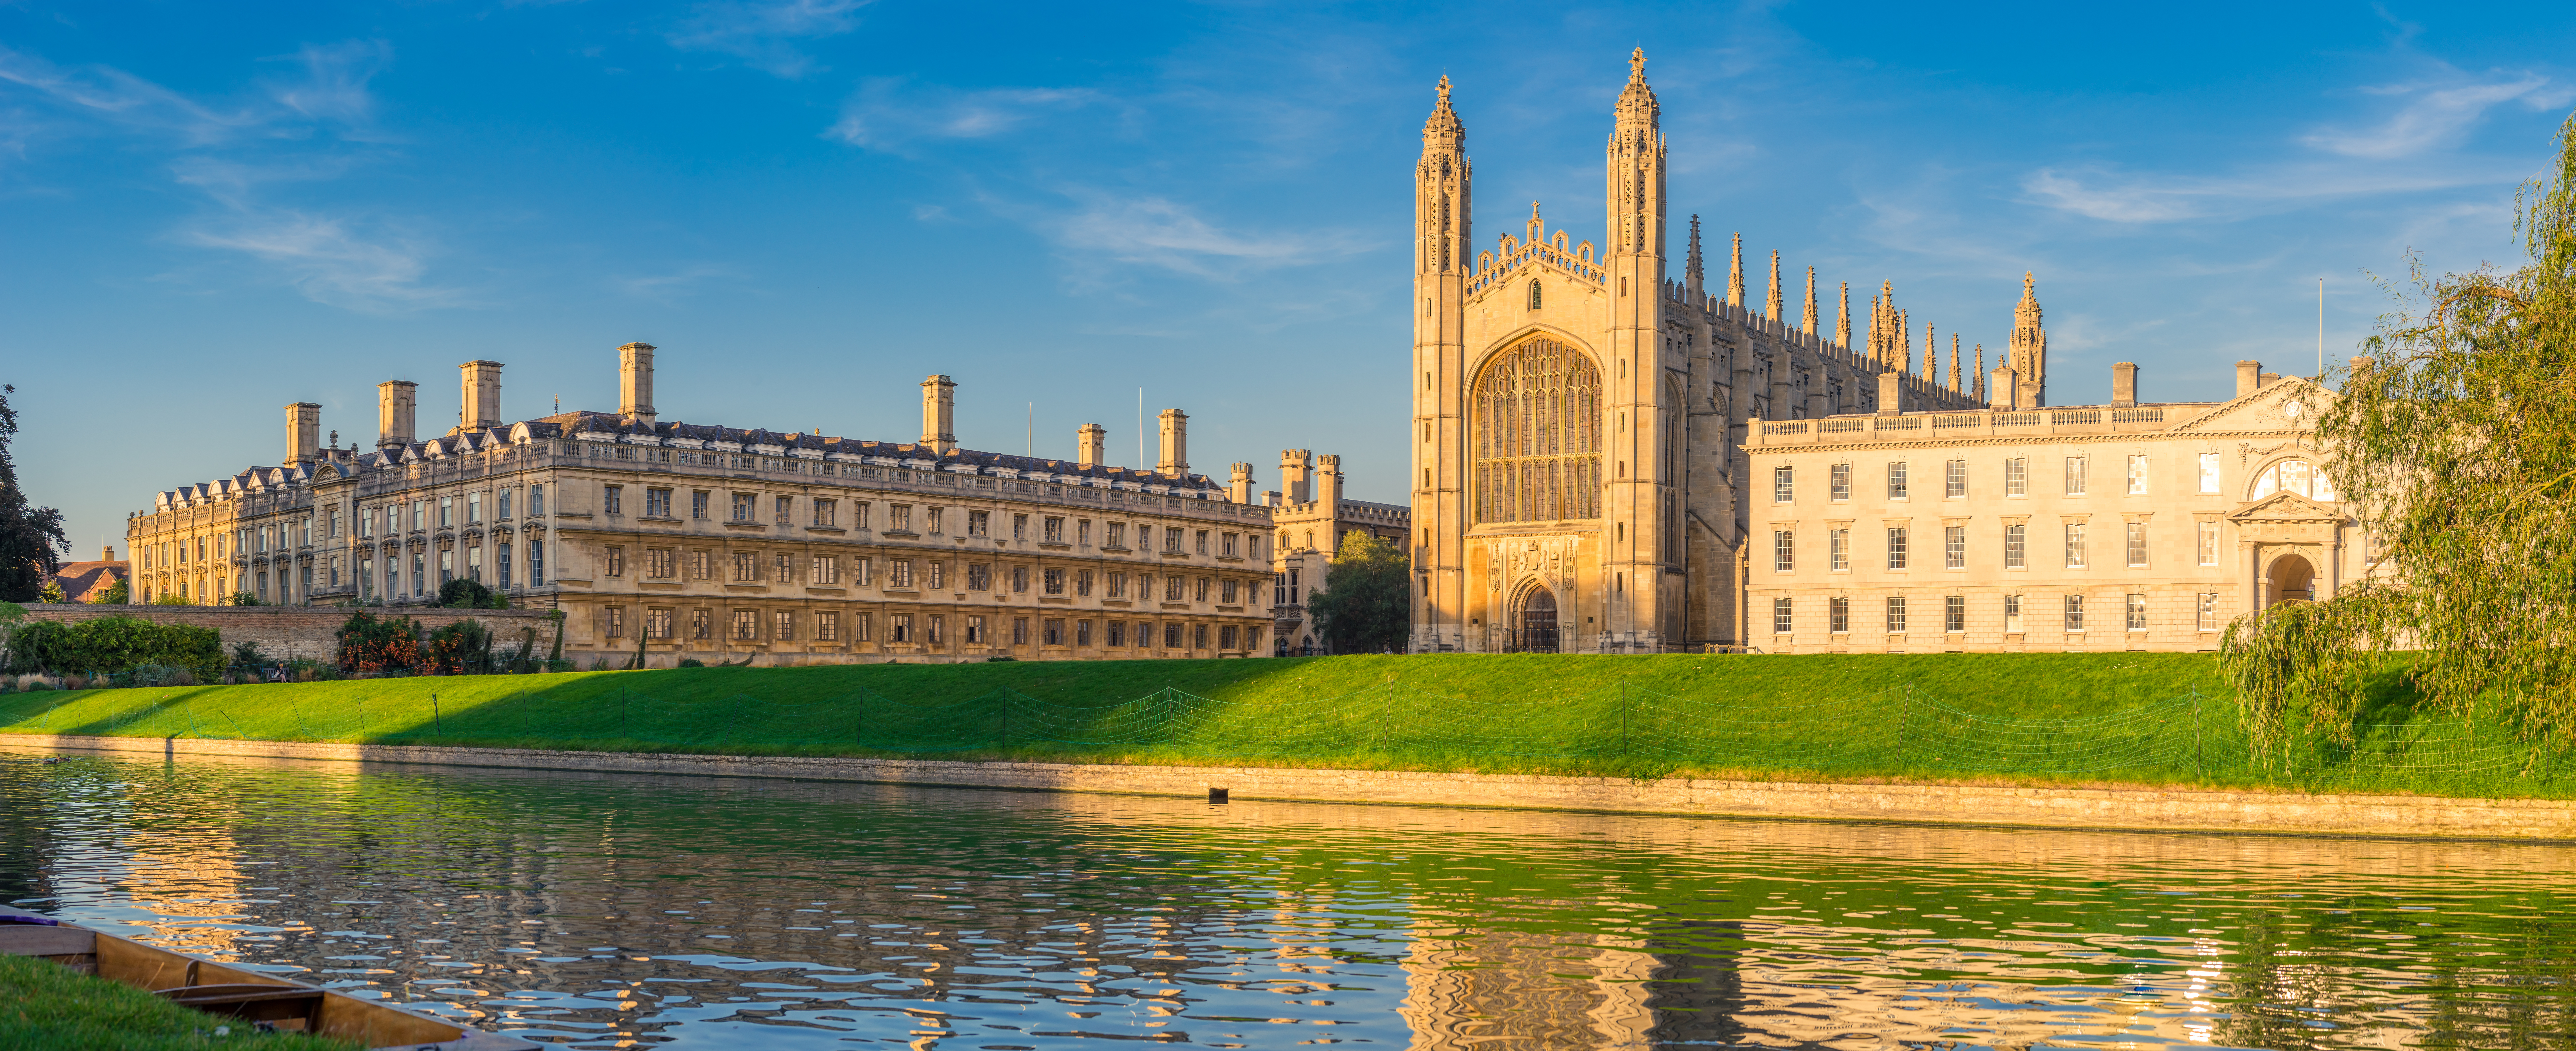 Picture of Kings College Cambridge